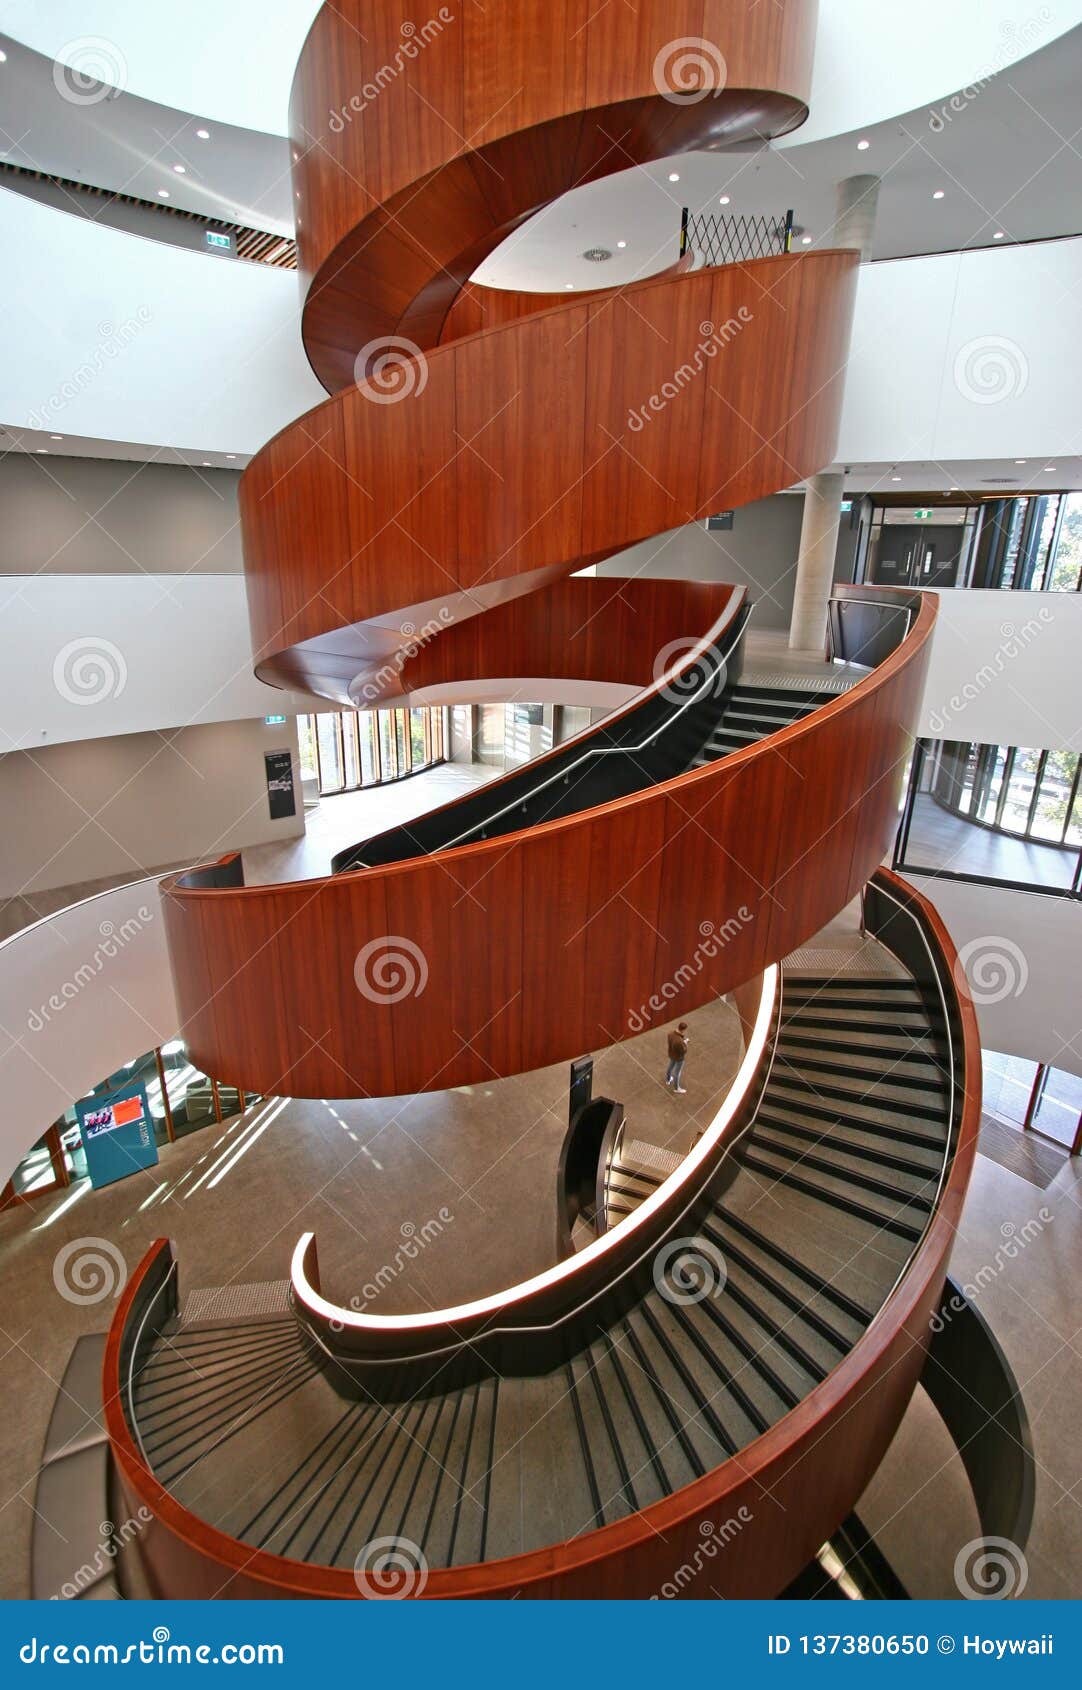 Multistory Indoor Atrium With Suspended Wood Spiral Stairs